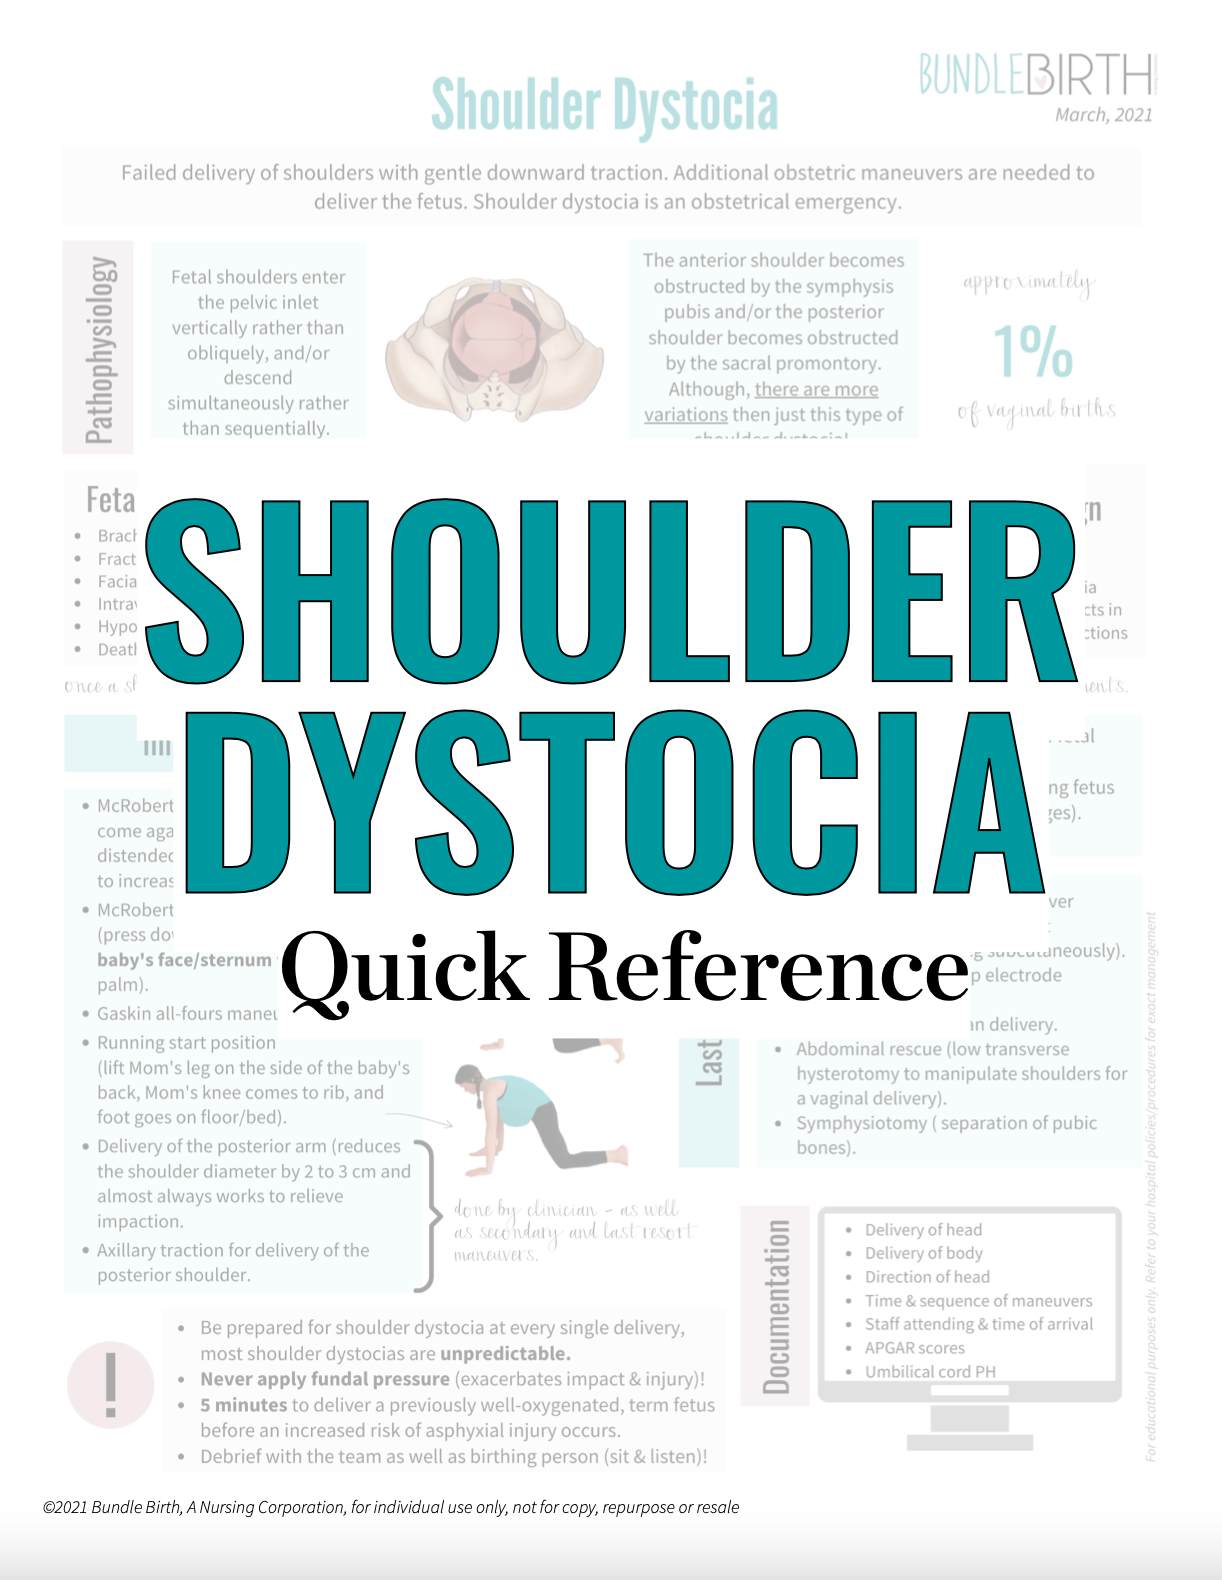 Shoulder Dystocia Quick Reference